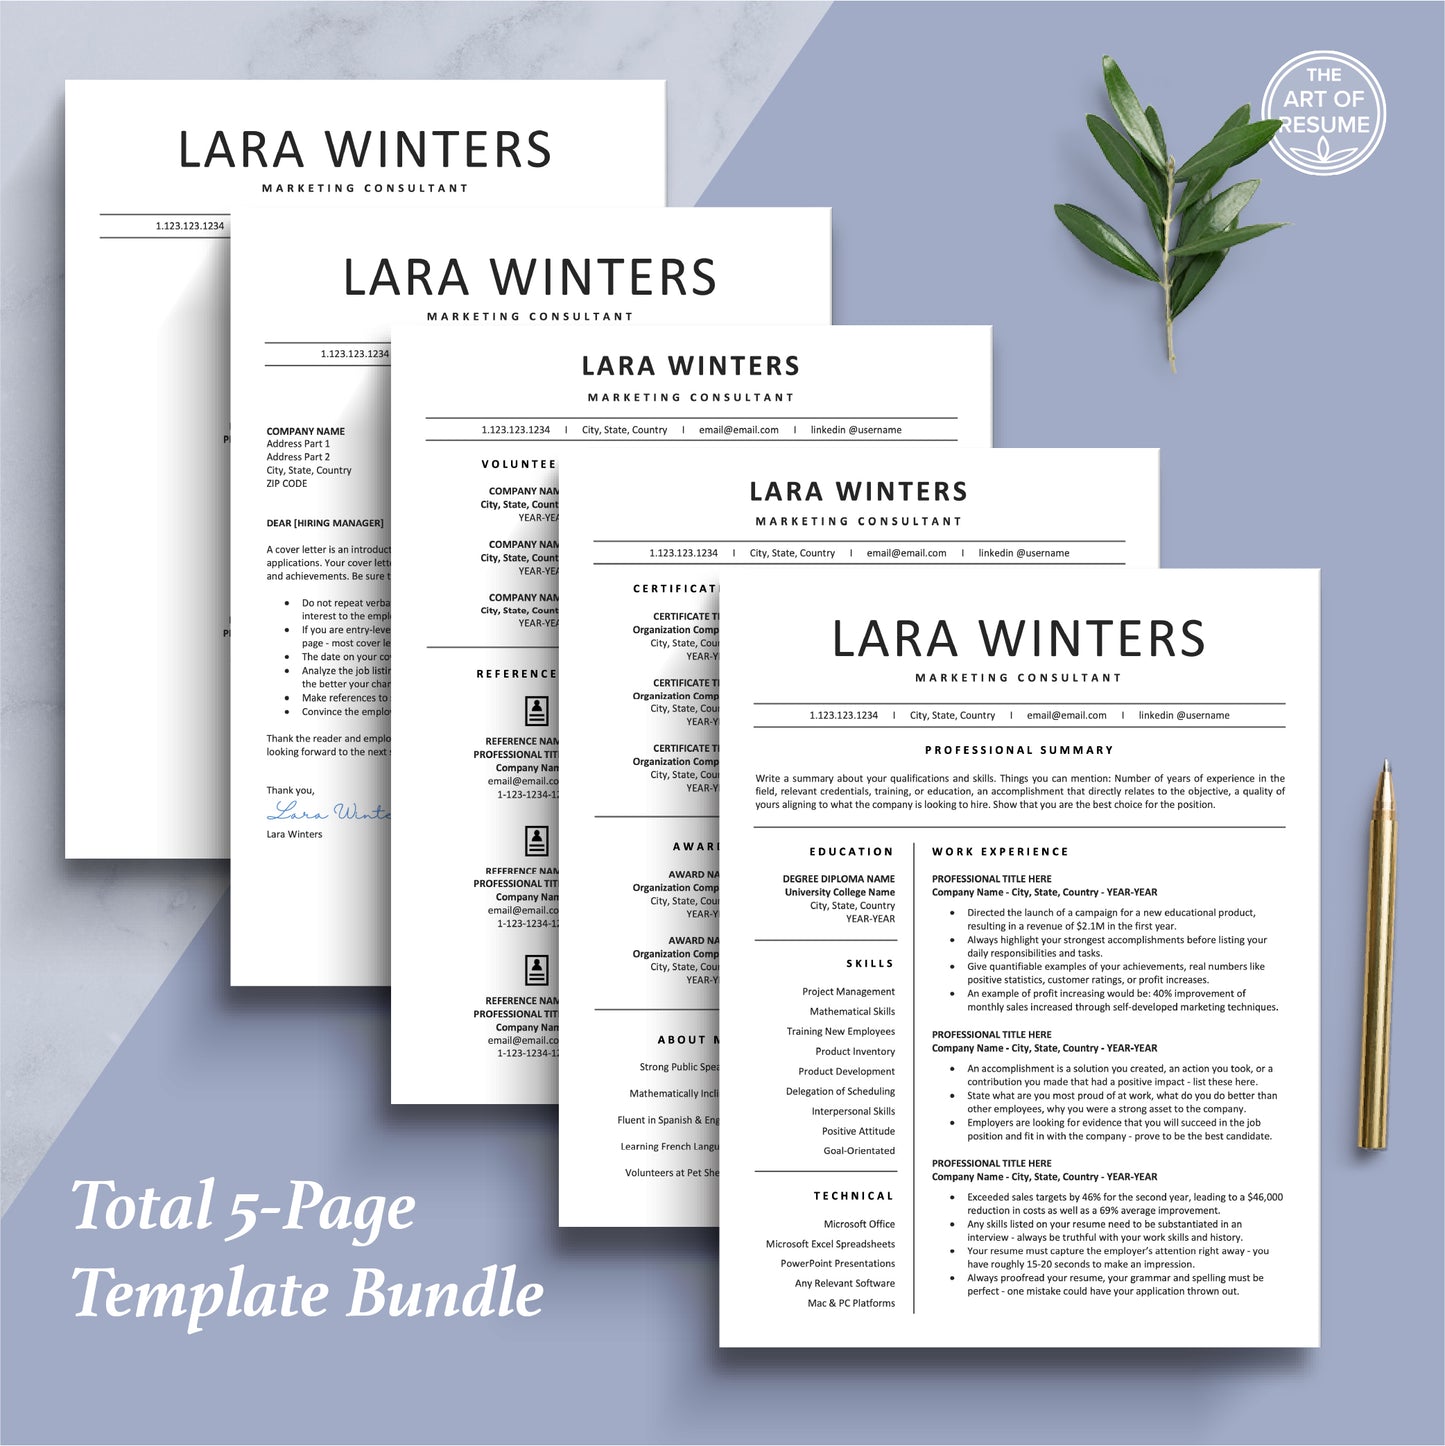 The Art of Resume Templates |  Professional PSimple Resume CV Design Bundle including matching cover letter and reference page